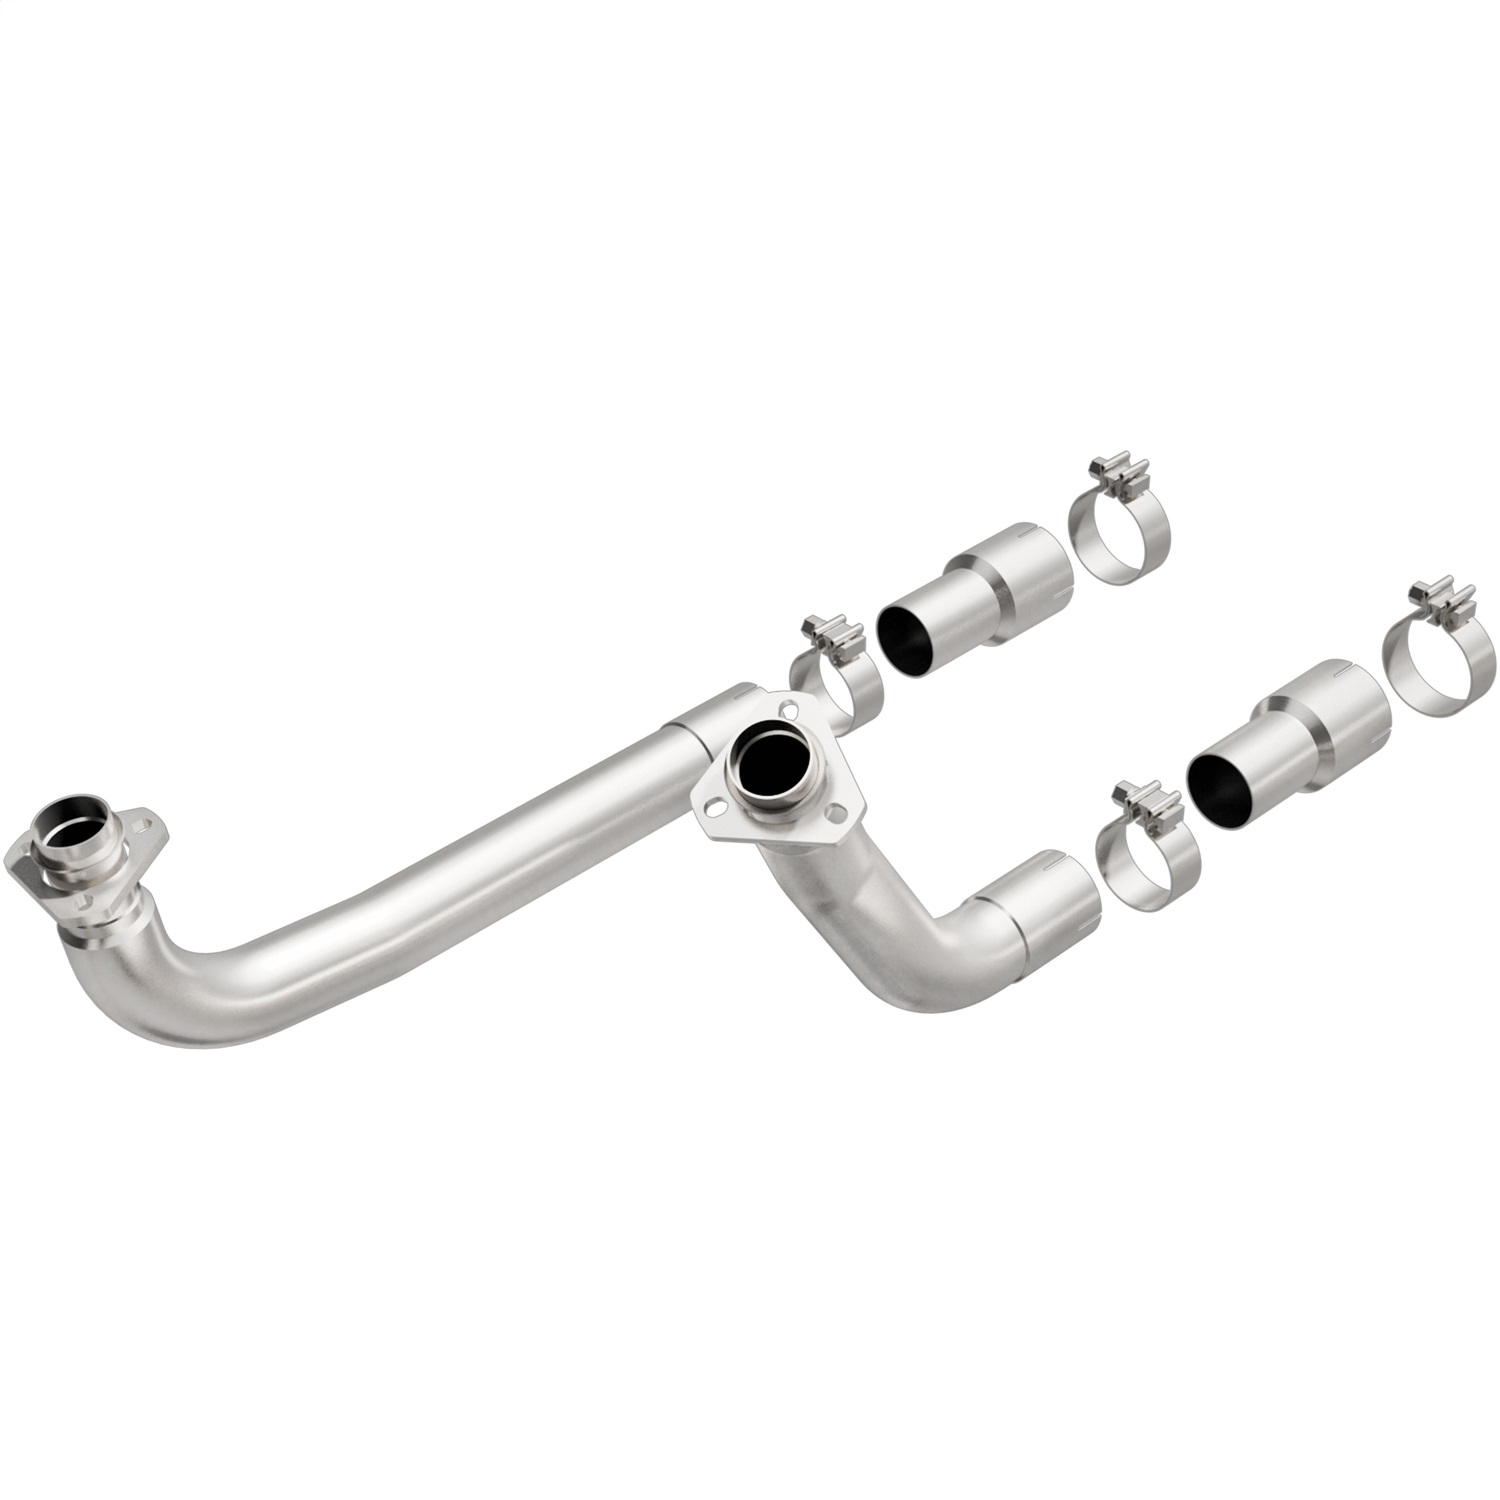 Magnaflow Performance Exhaust Magnaflow Performance Exhaust 16434 Stainless Steel Exhaust Pipe